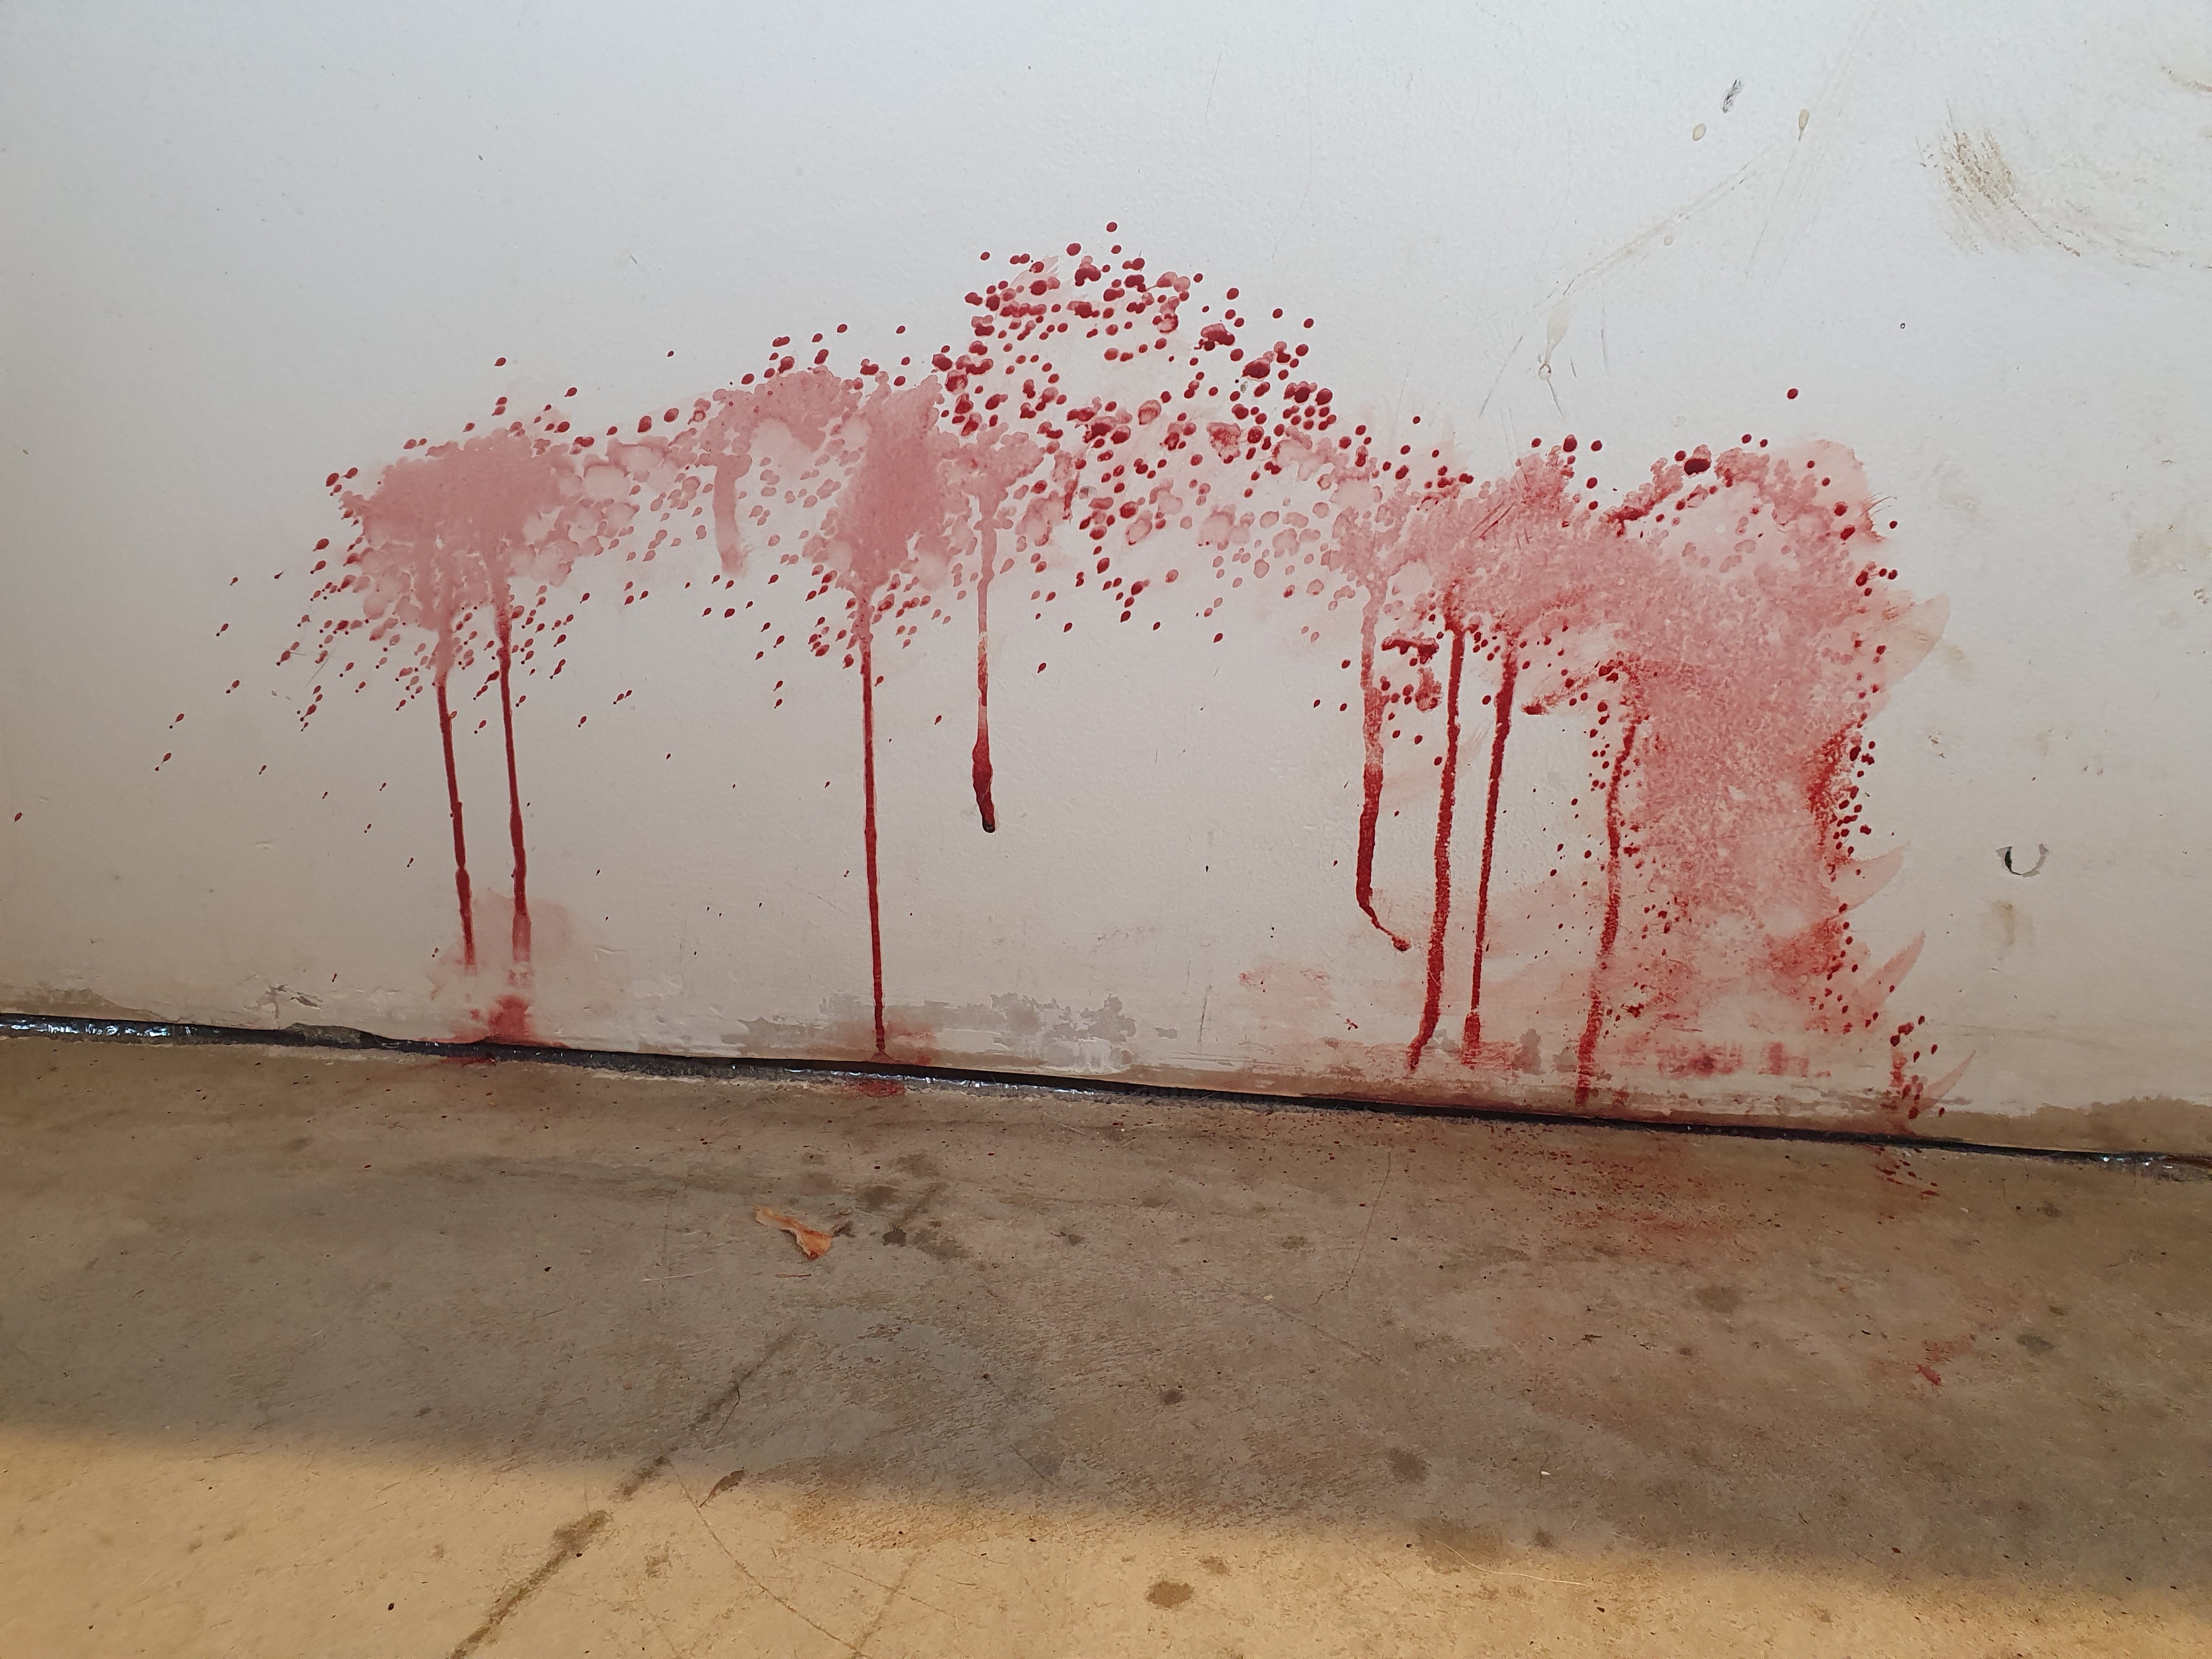 blood spattered on the wall